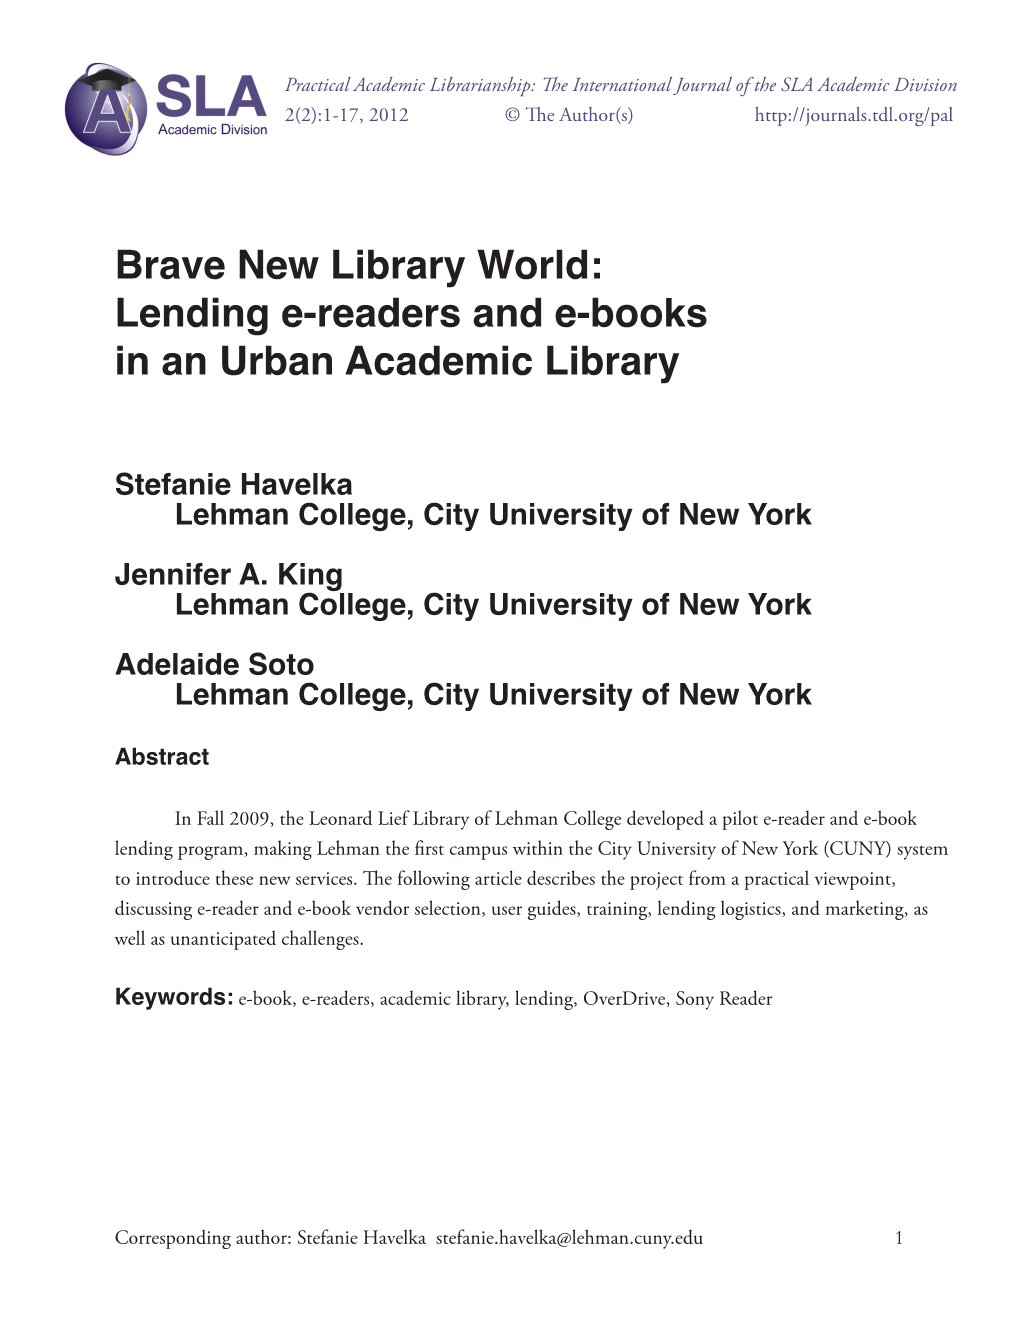 Lending E-Readers and E-Books in an Urban Academic Library